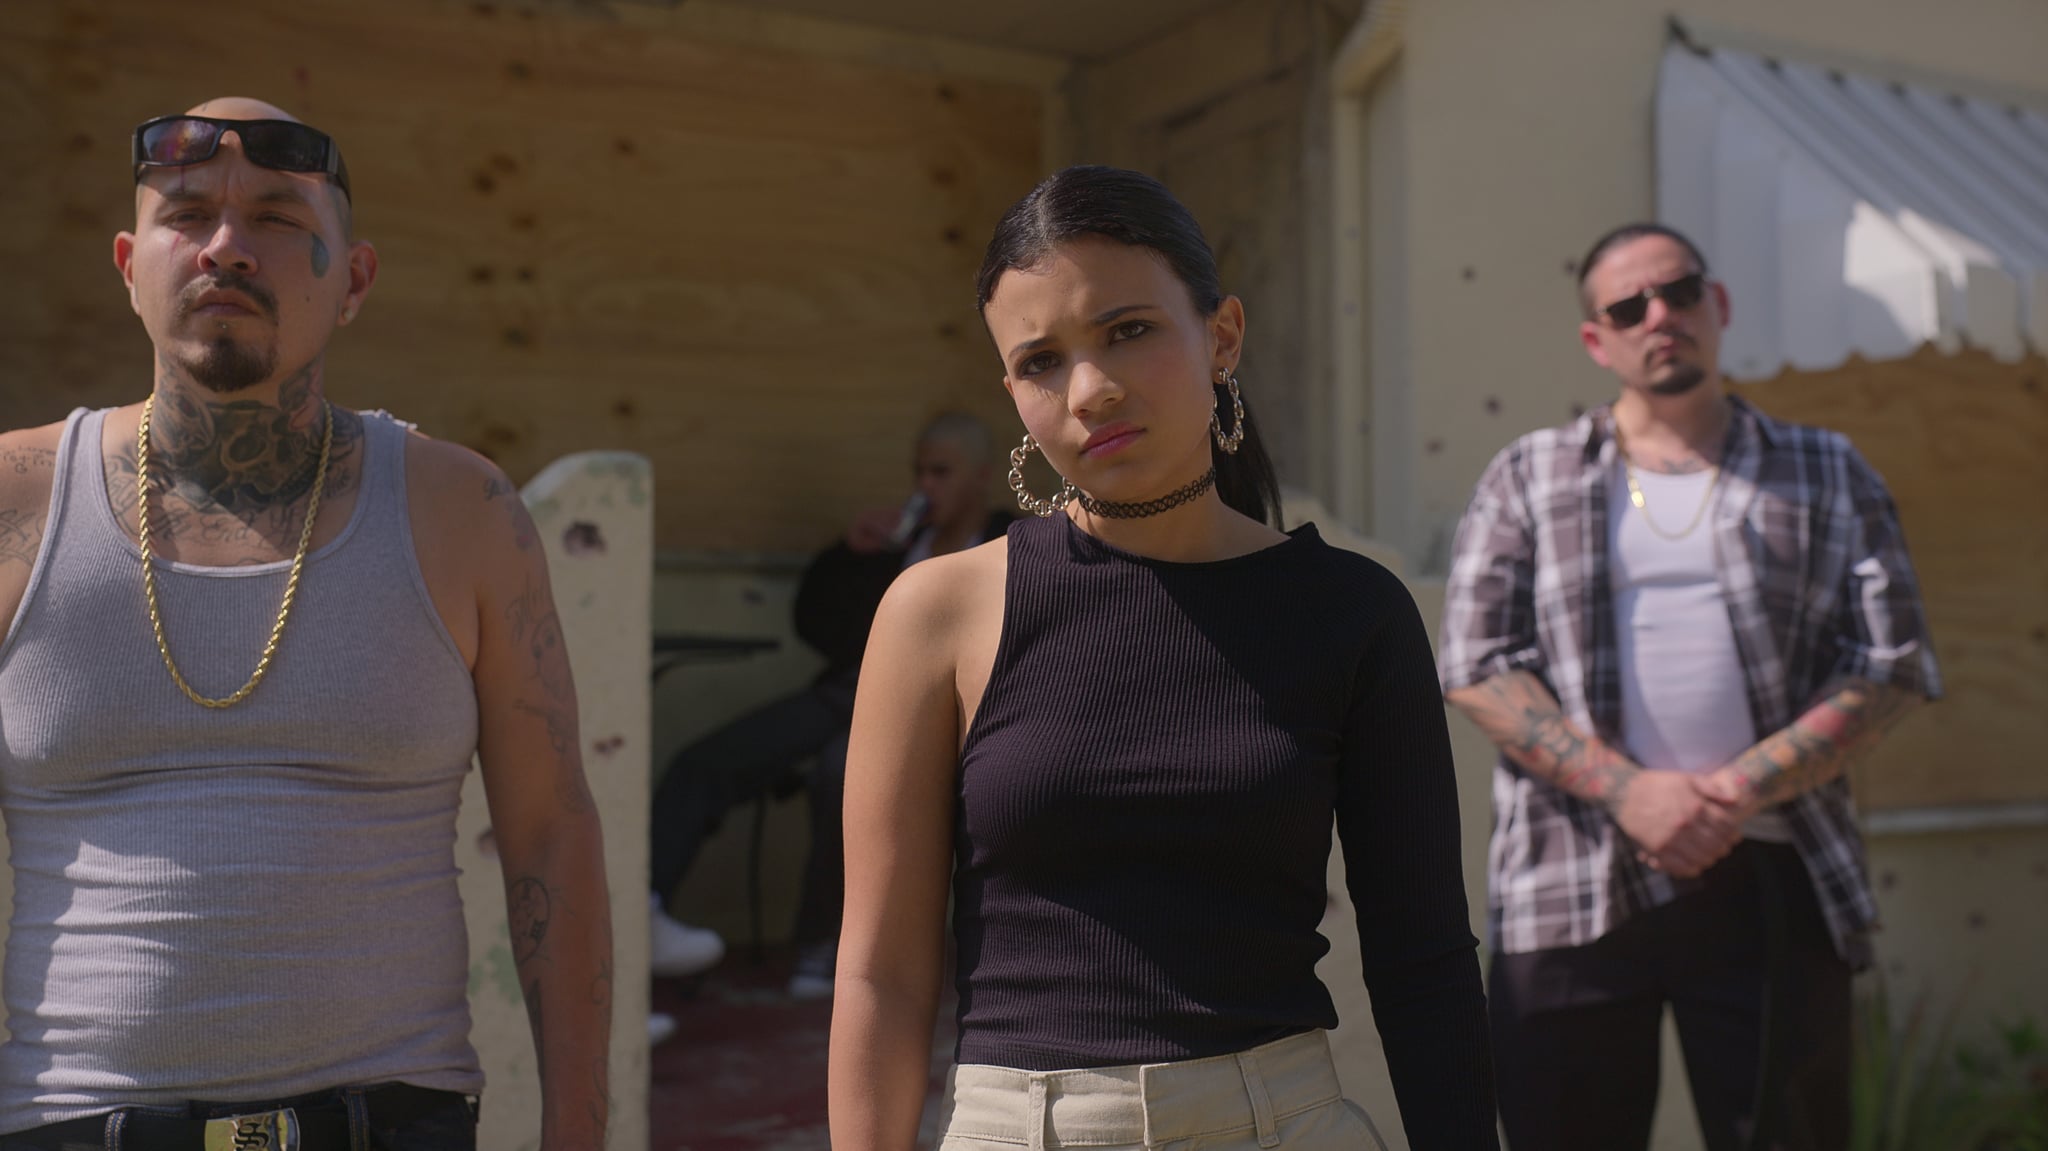 ON MY BLOCK (L to R) NIKKI RODRIGUEZ as VERO in episode 406 of ON MY BLOCK Cr. COURTESY OF NETFLIX © 2021